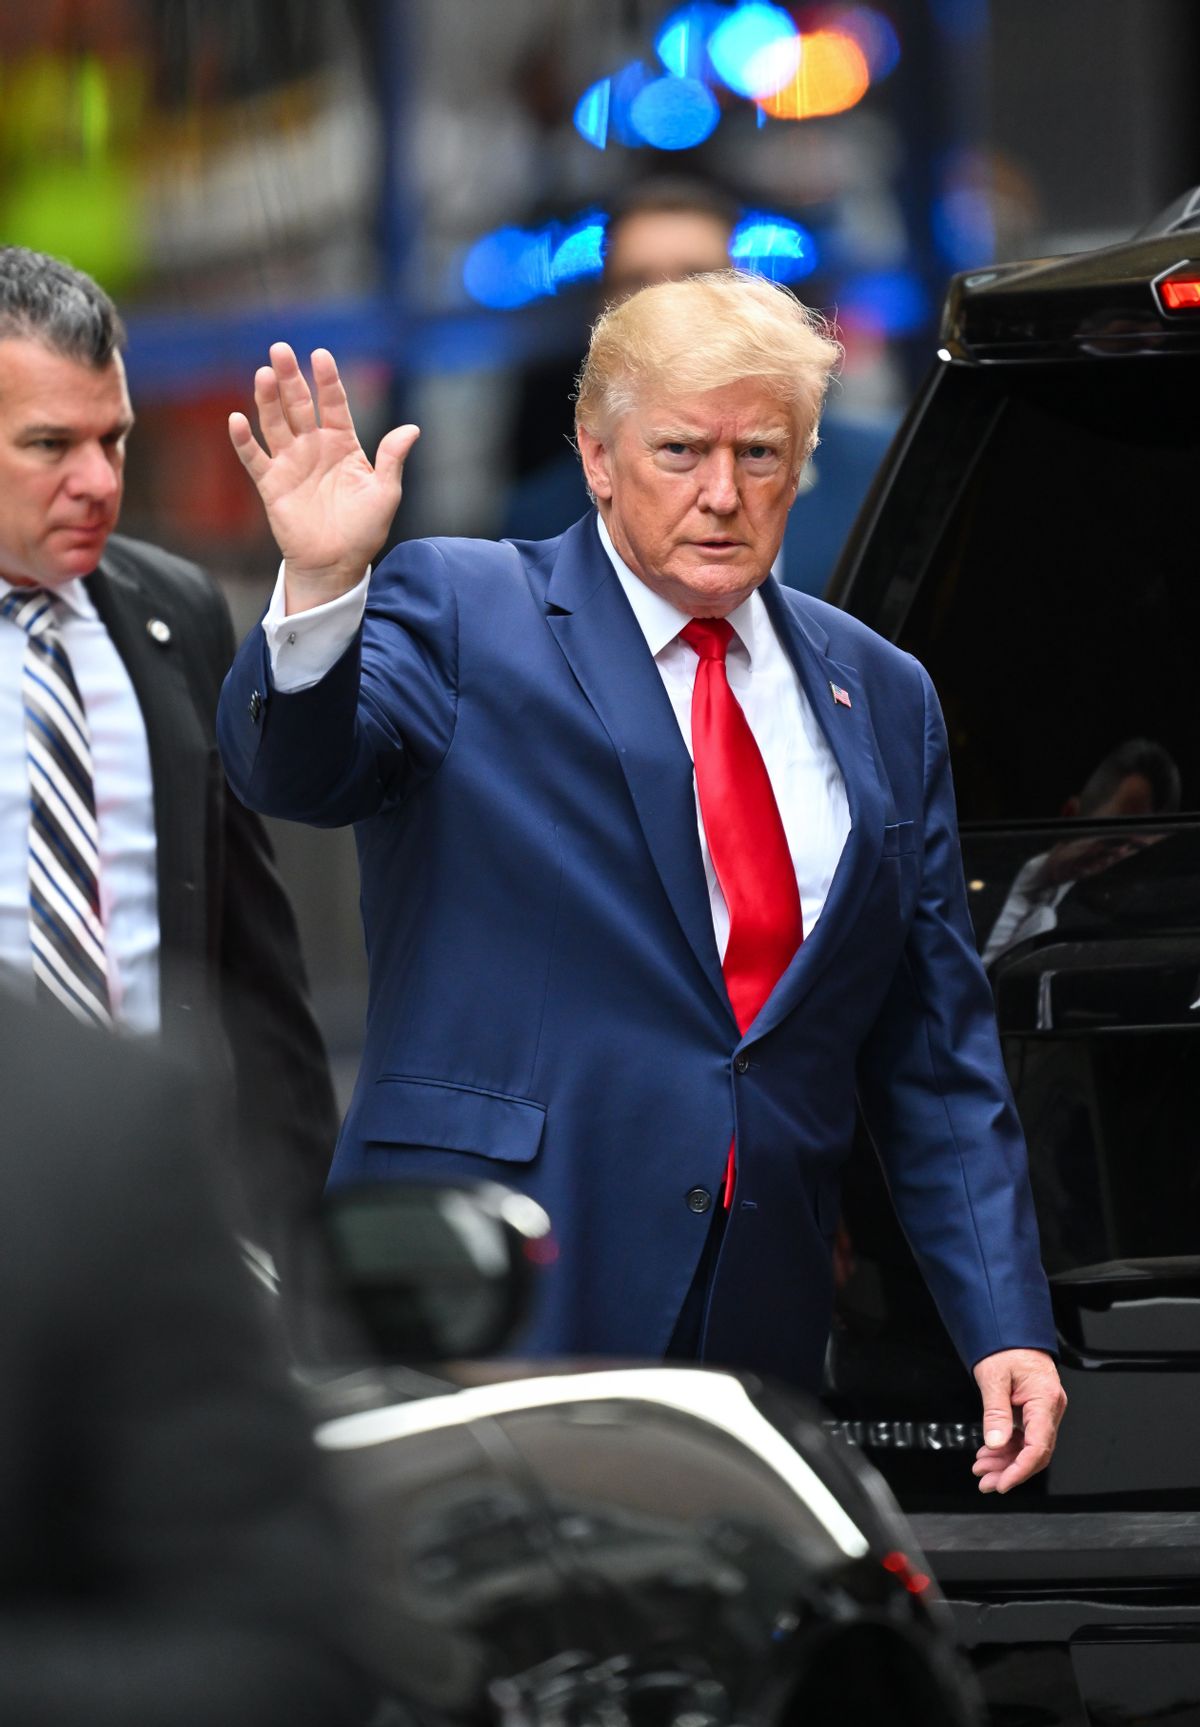 NEW YORK, NEW YORK - AUGUST 10:  Former U.S. President Donald Trump leaves Trump Tower to meet with New York Attorney General Letitia James for a civil investigation on August 10, 2022 in New York City.  (Photo by James Devaney/GC Images) (James Devaney/GC Images)